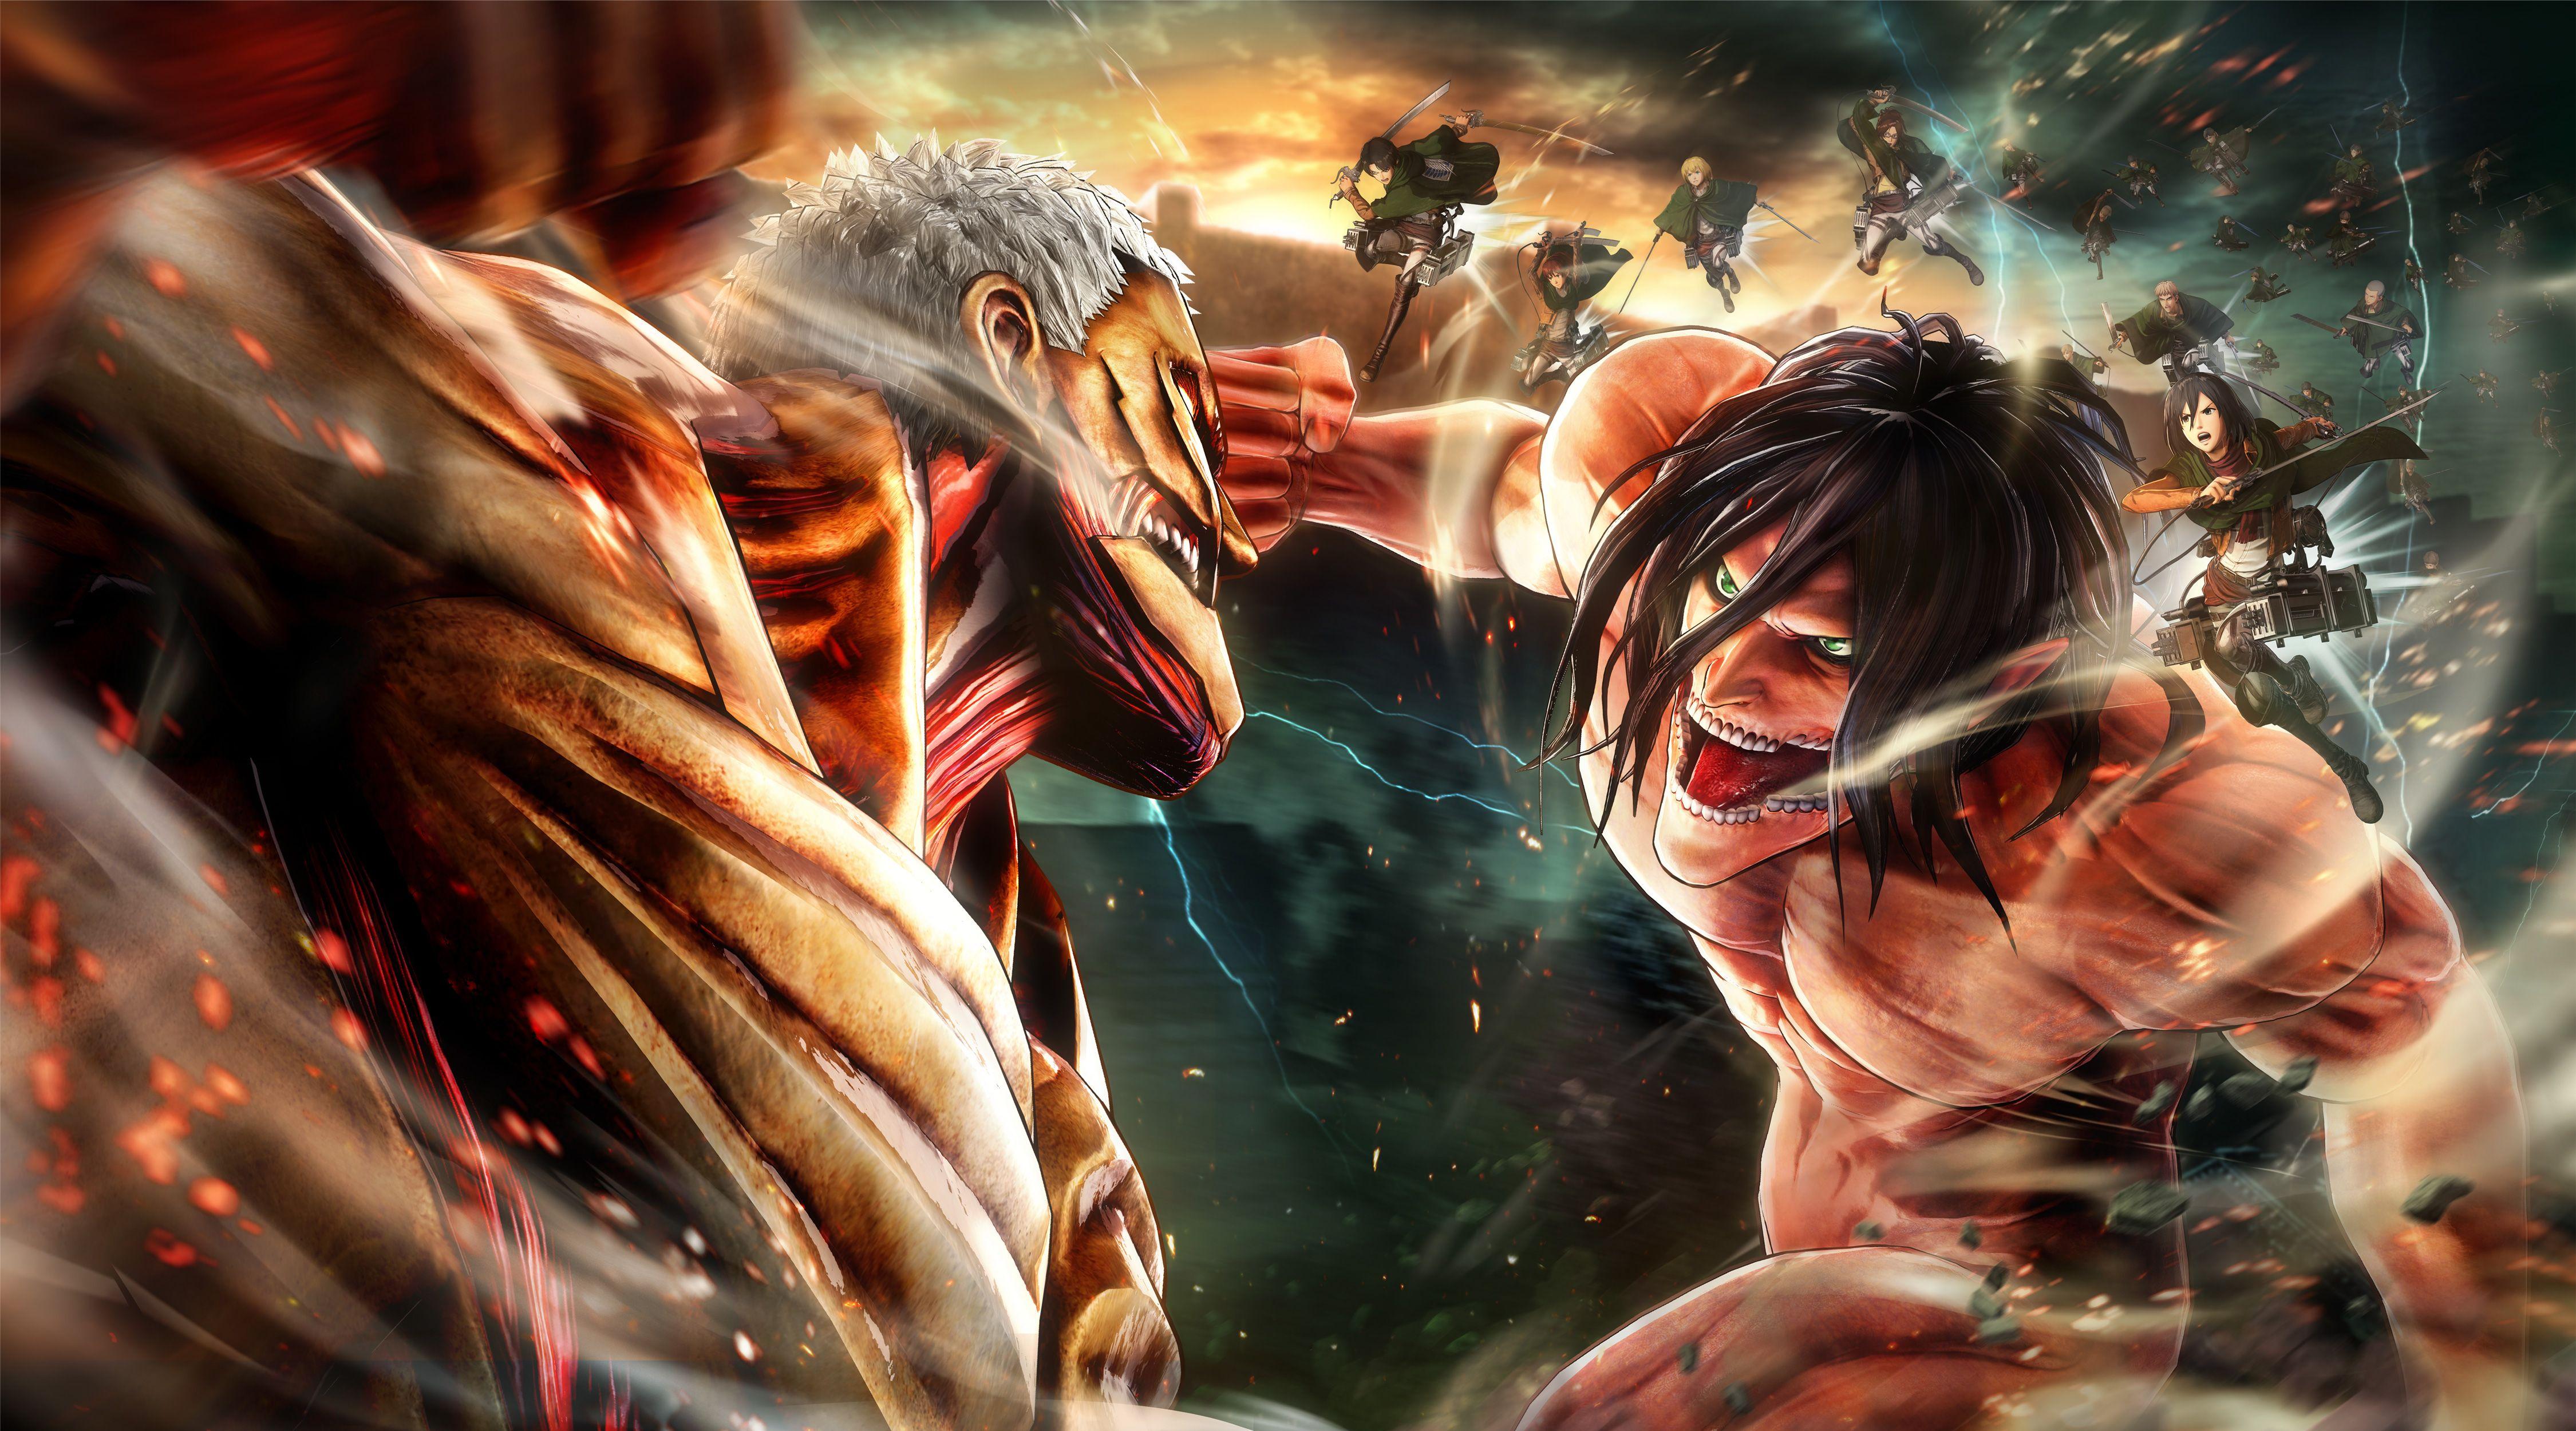 4500 x 2500 · jpeg - Attack On Titan 4k Wallpapers - Top Free Attack On Titan 4k Backgrounds ...